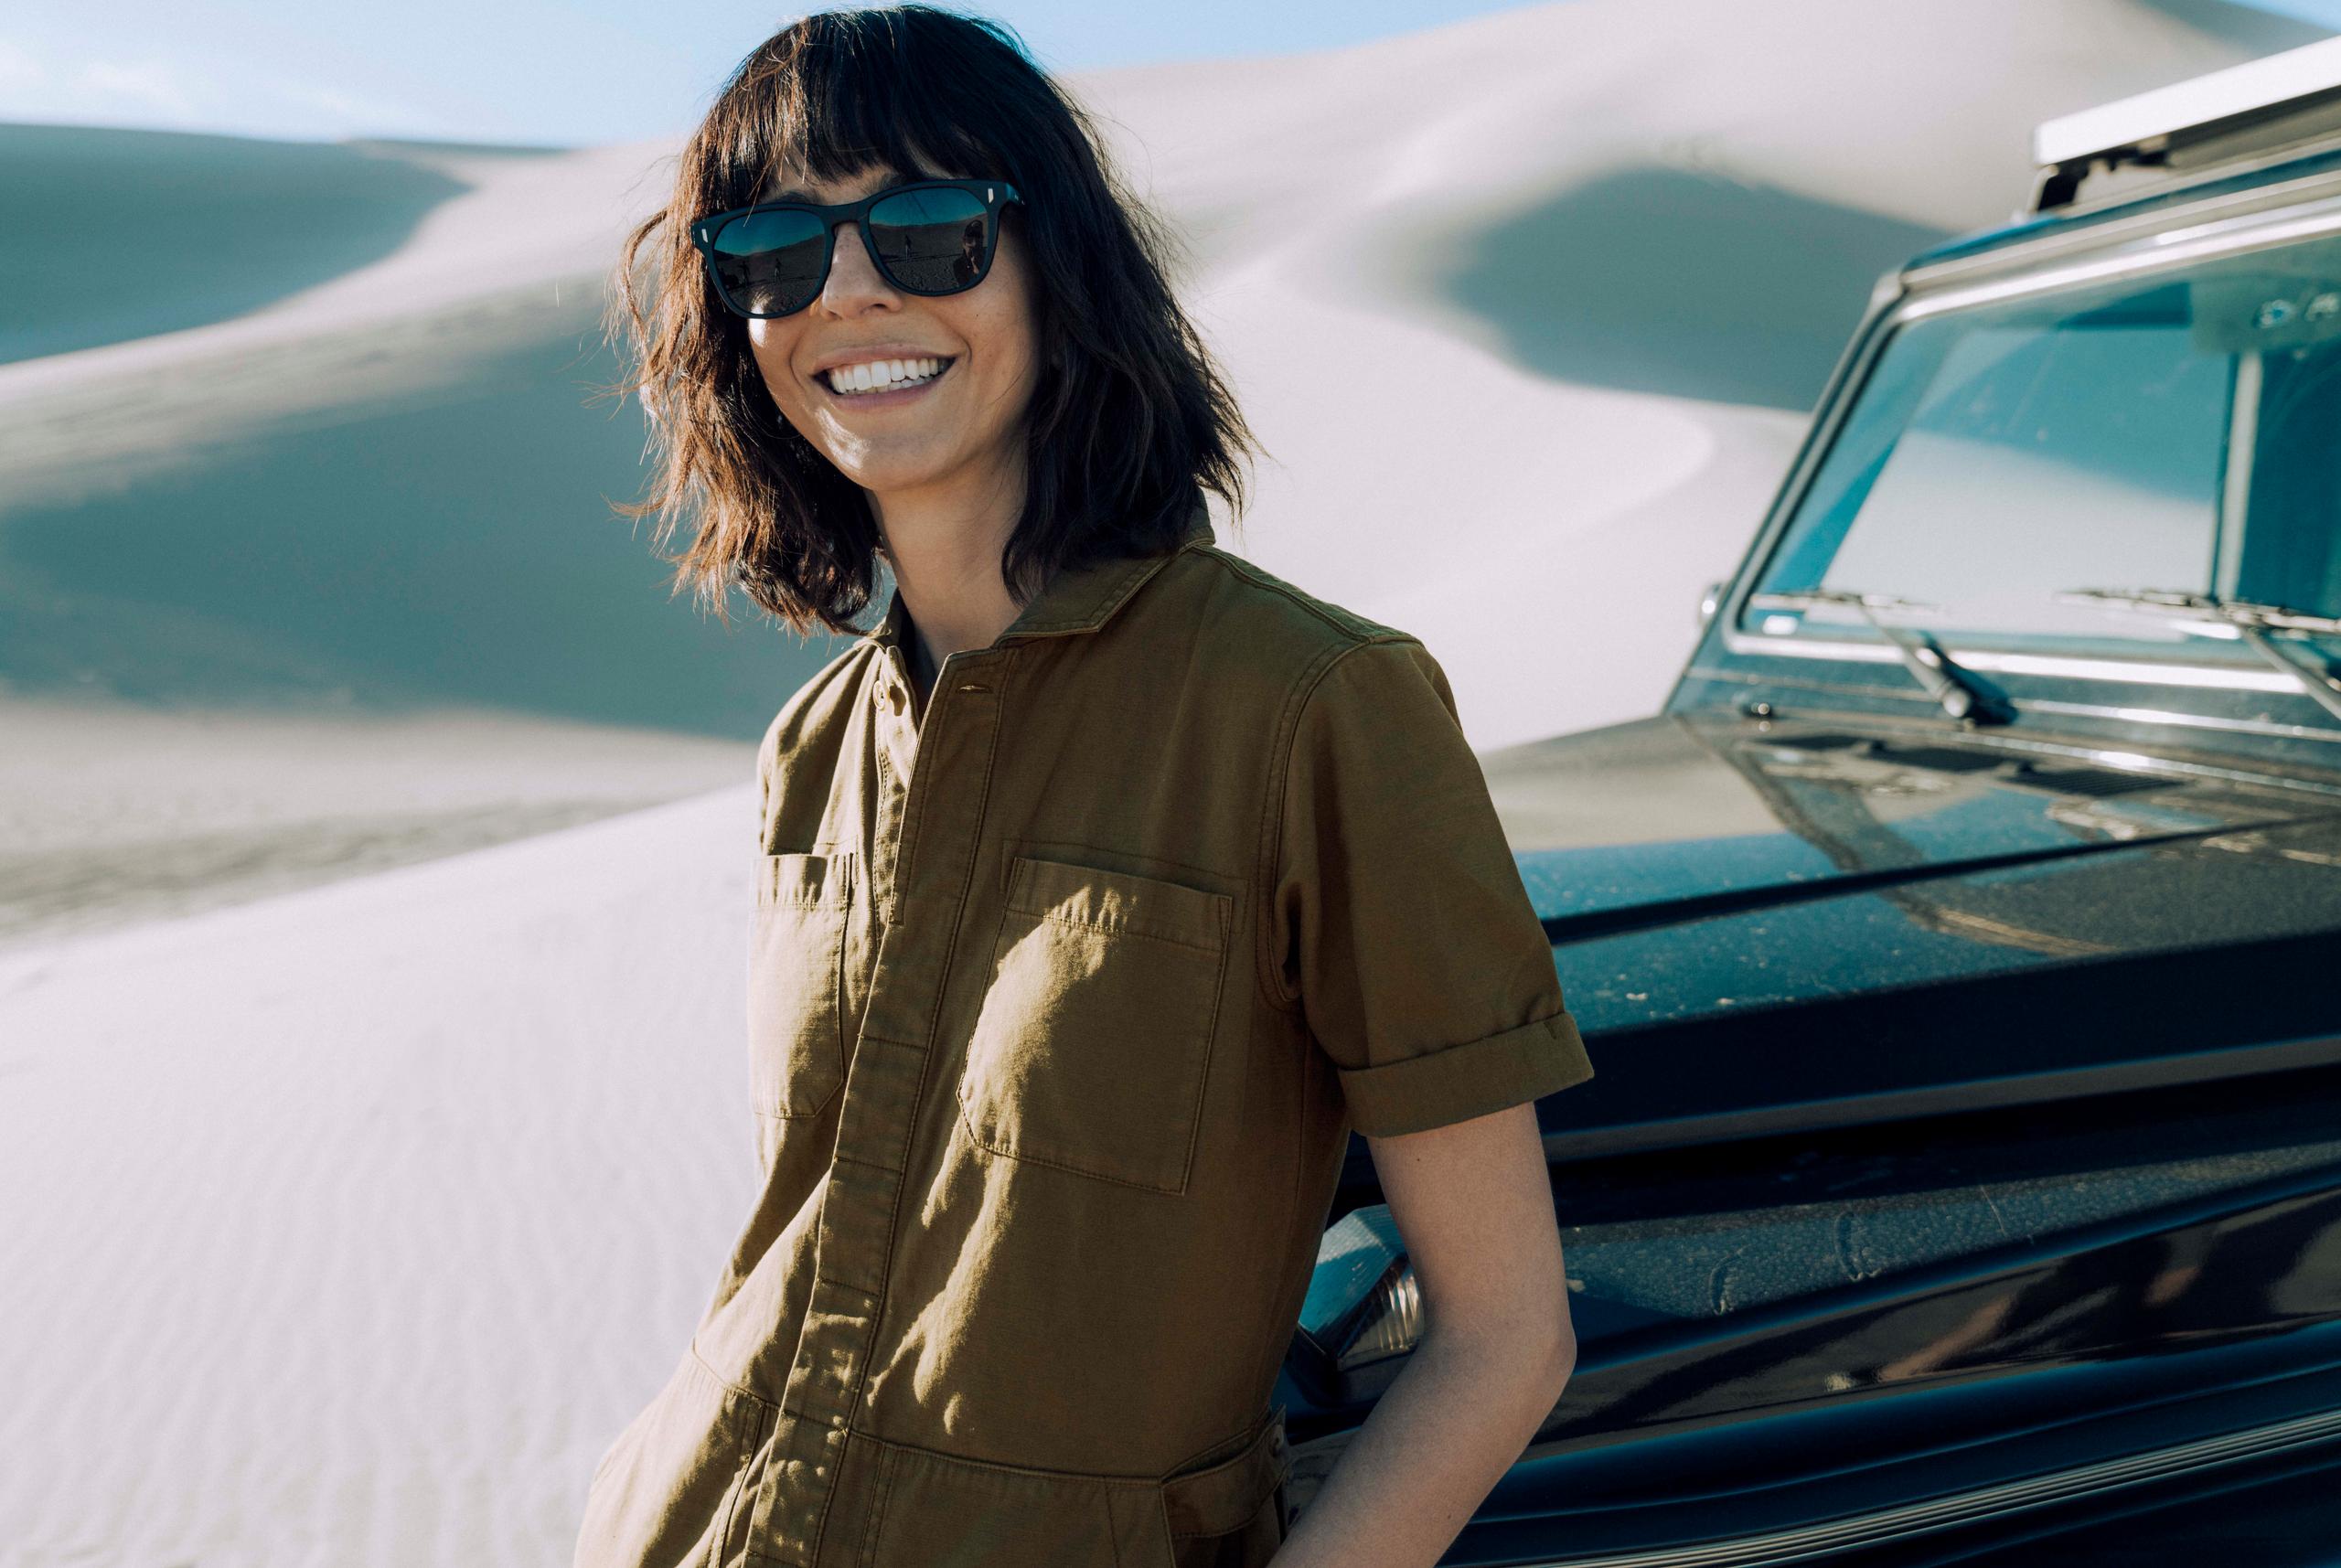 Woman wearing Yosemite sunglasses smiling in front of truck and sand dune background